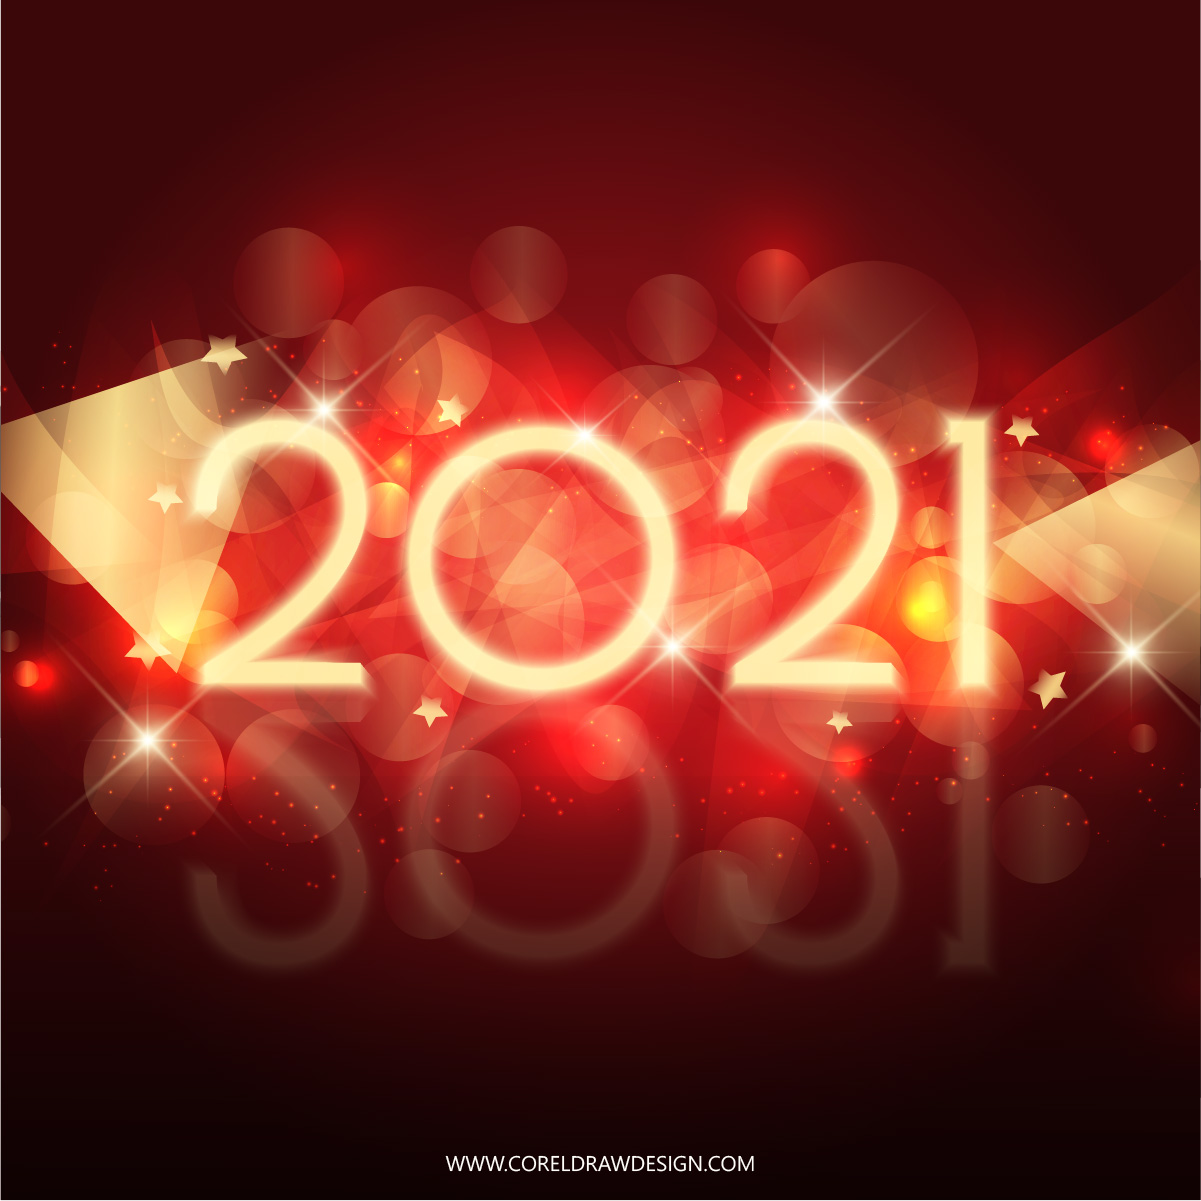 New Year 2021 lettering card